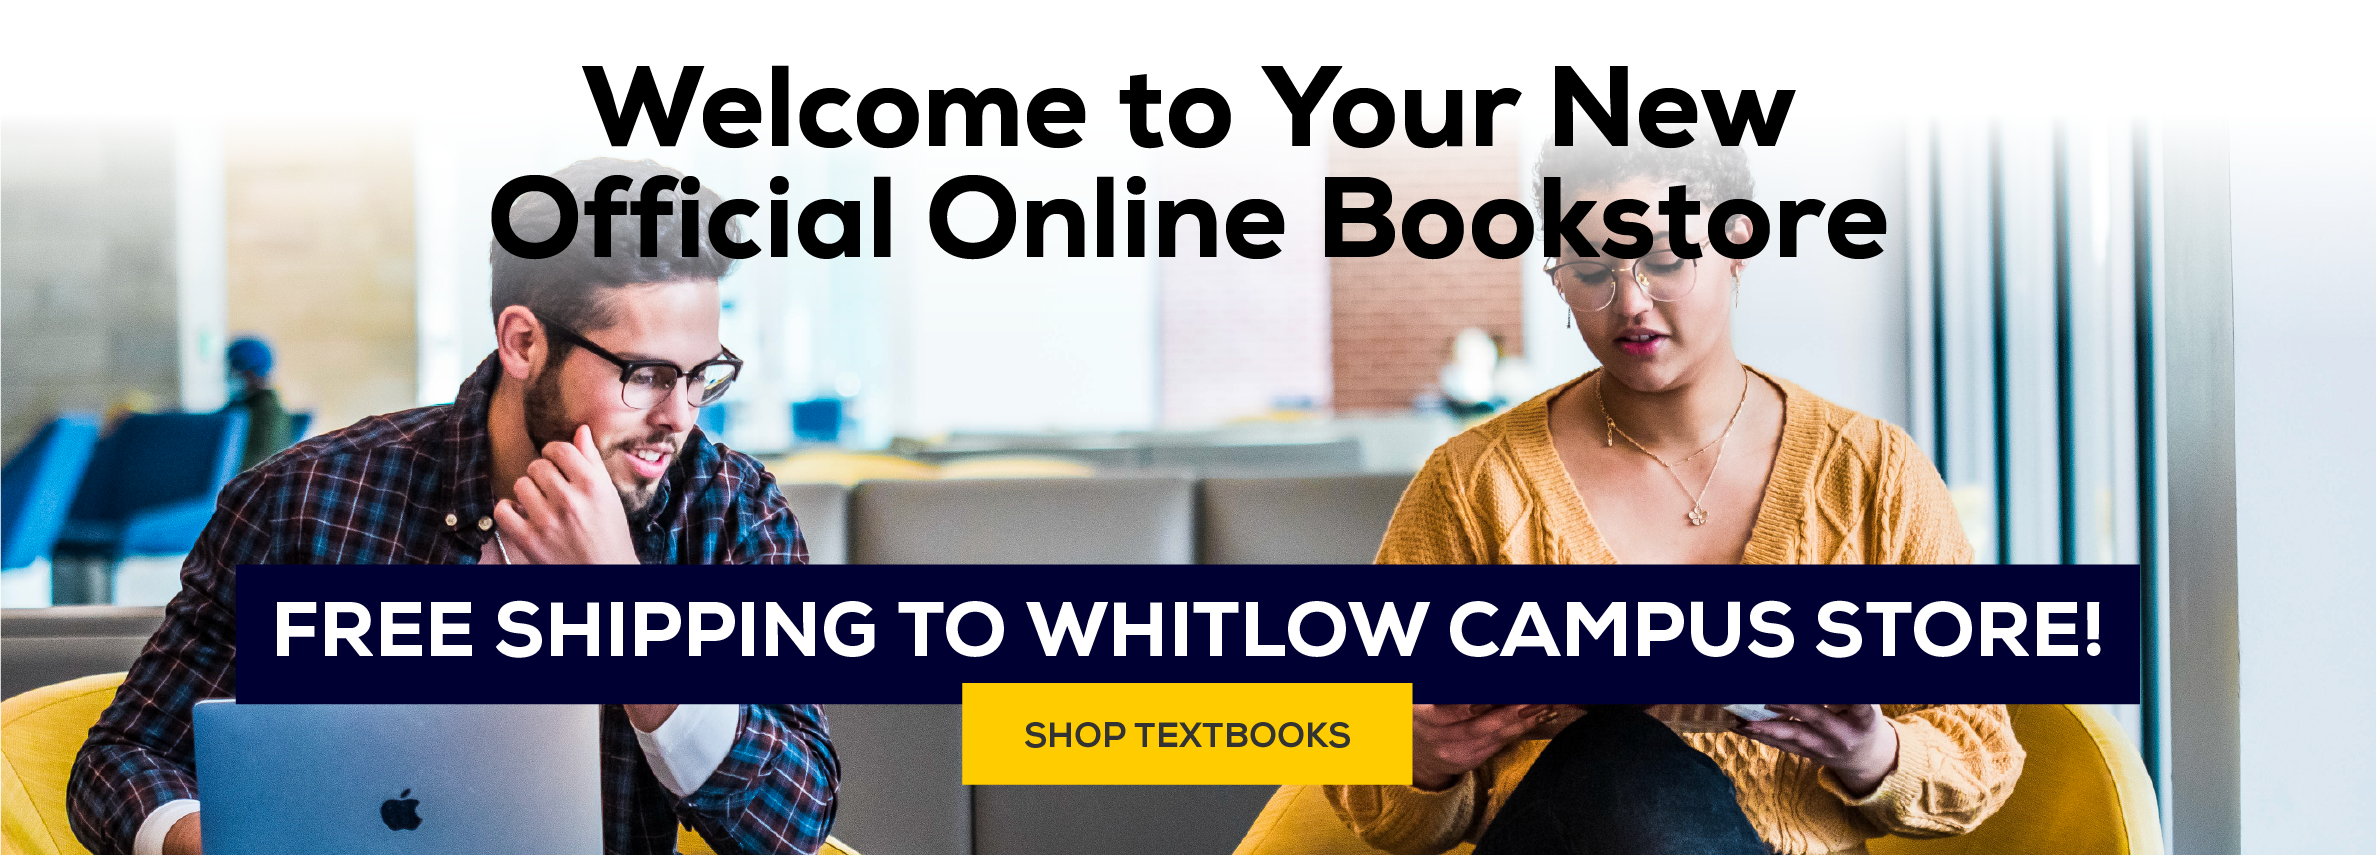 Welcome to Your NEW Official Online Bookstore! Free shipping to Whitlow Campus Store! Shop textbooks